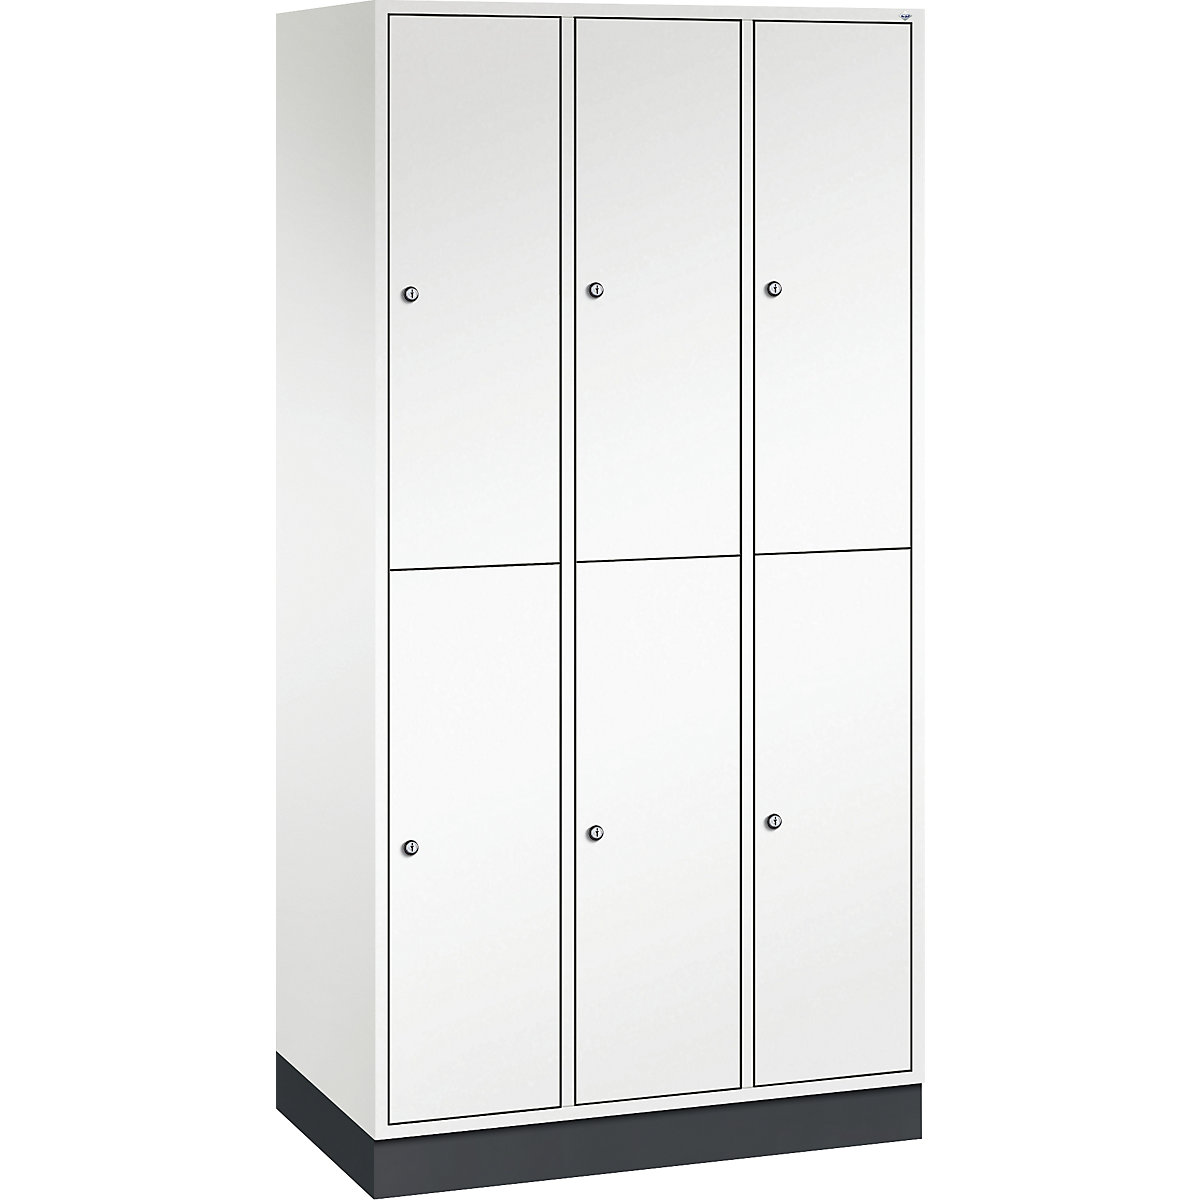 INTRO double tier steel cloakroom locker – C+P, WxD 920 x 500 mm, 6 compartments, pure white body, pure white doors